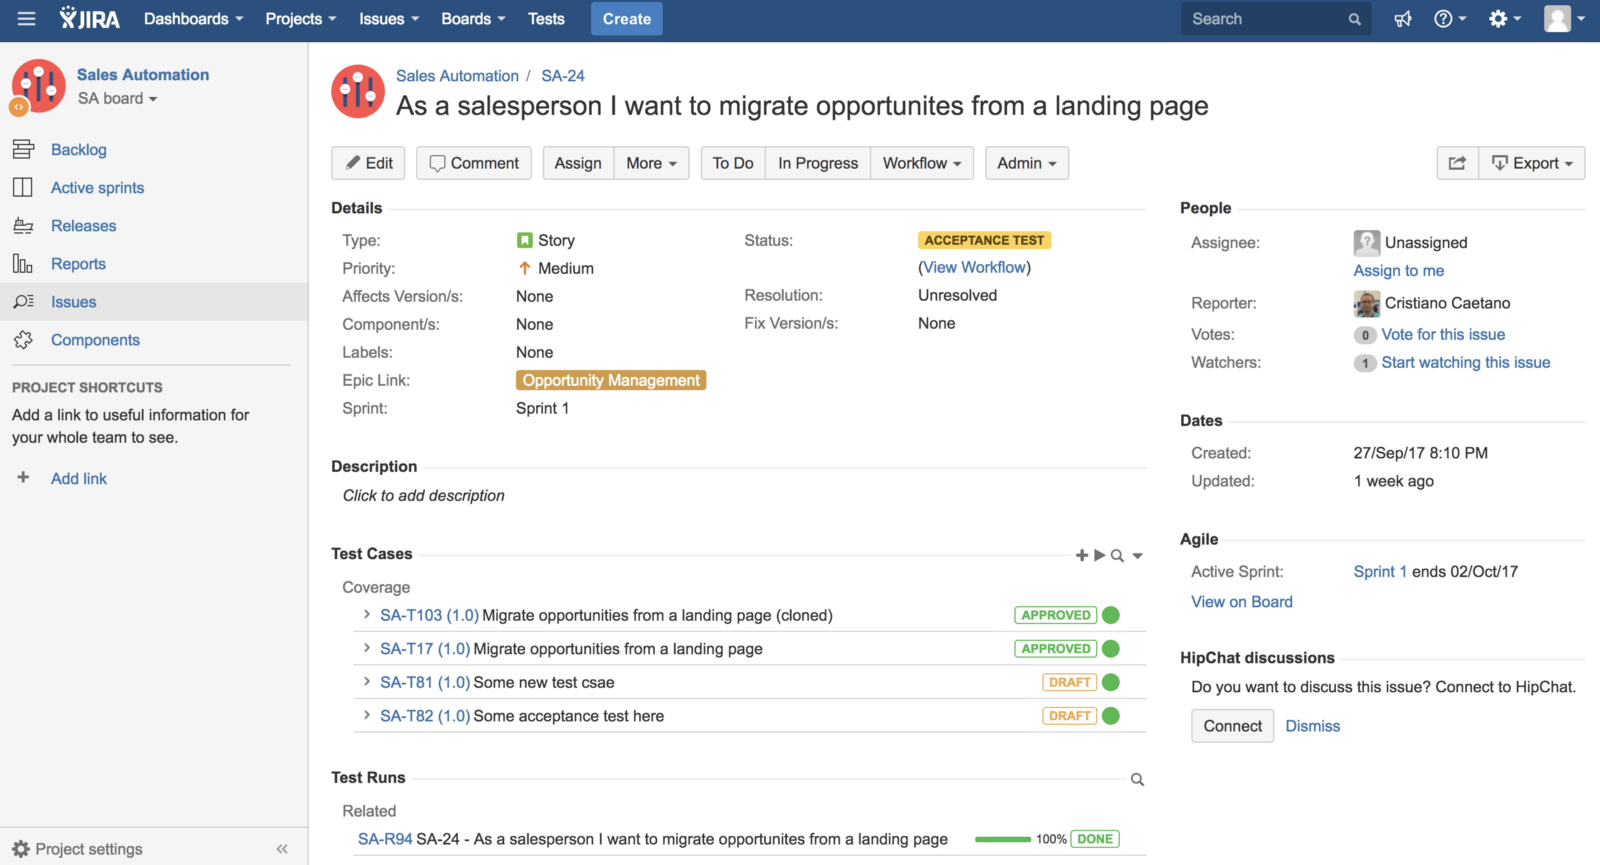 Jira Issue showing last execution results for related test cases